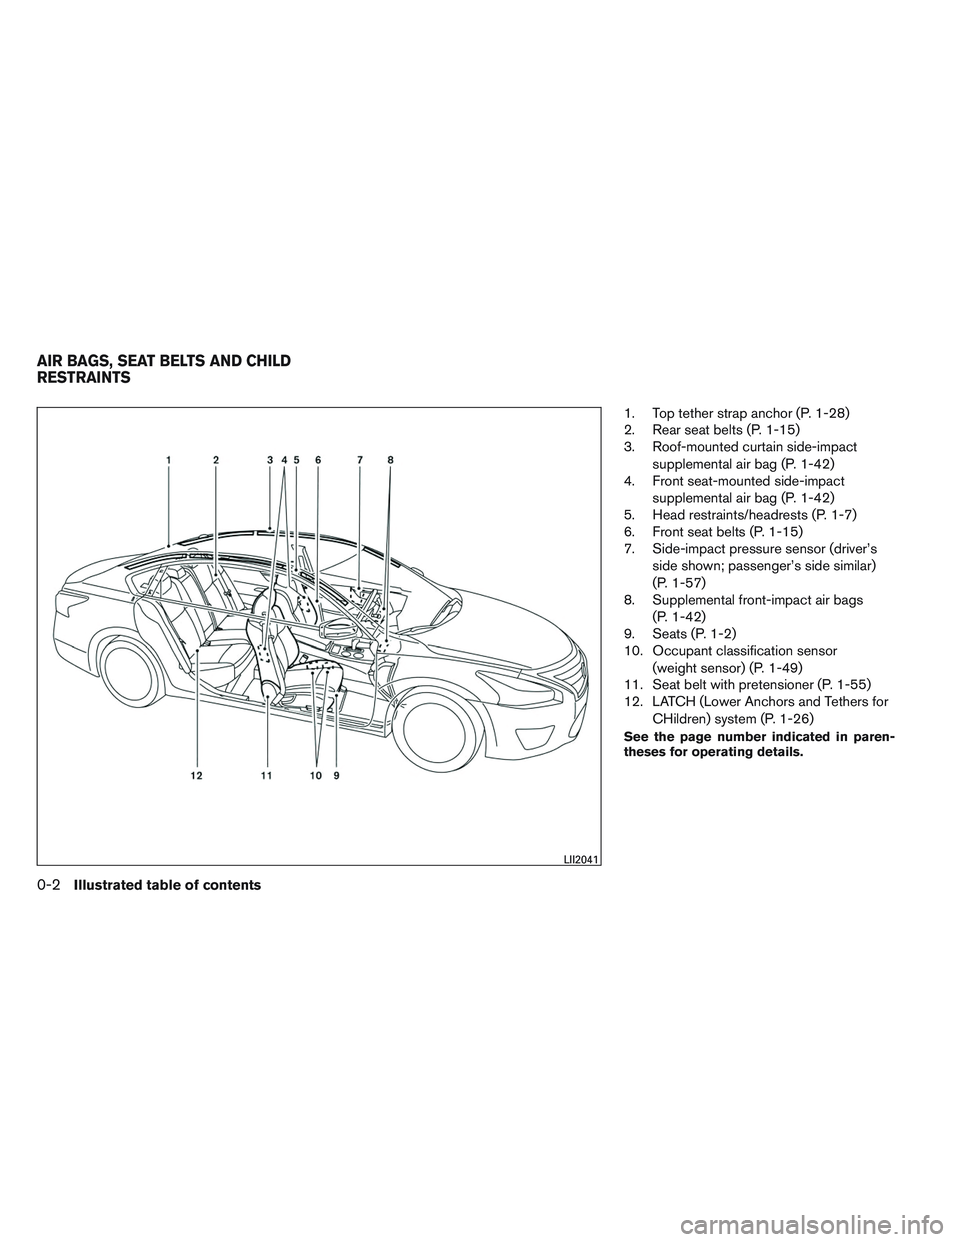 NISSAN ALTIMA SEDAN 2014  Owners Manual 1. Top tether strap anchor (P. 1-28)
2. Rear seat belts (P. 1-15)
3. Roof-mounted curtain side-impactsupplemental air bag (P. 1-42)
4. Front seat-mounted side-impact
supplemental air bag (P. 1-42)
5. 